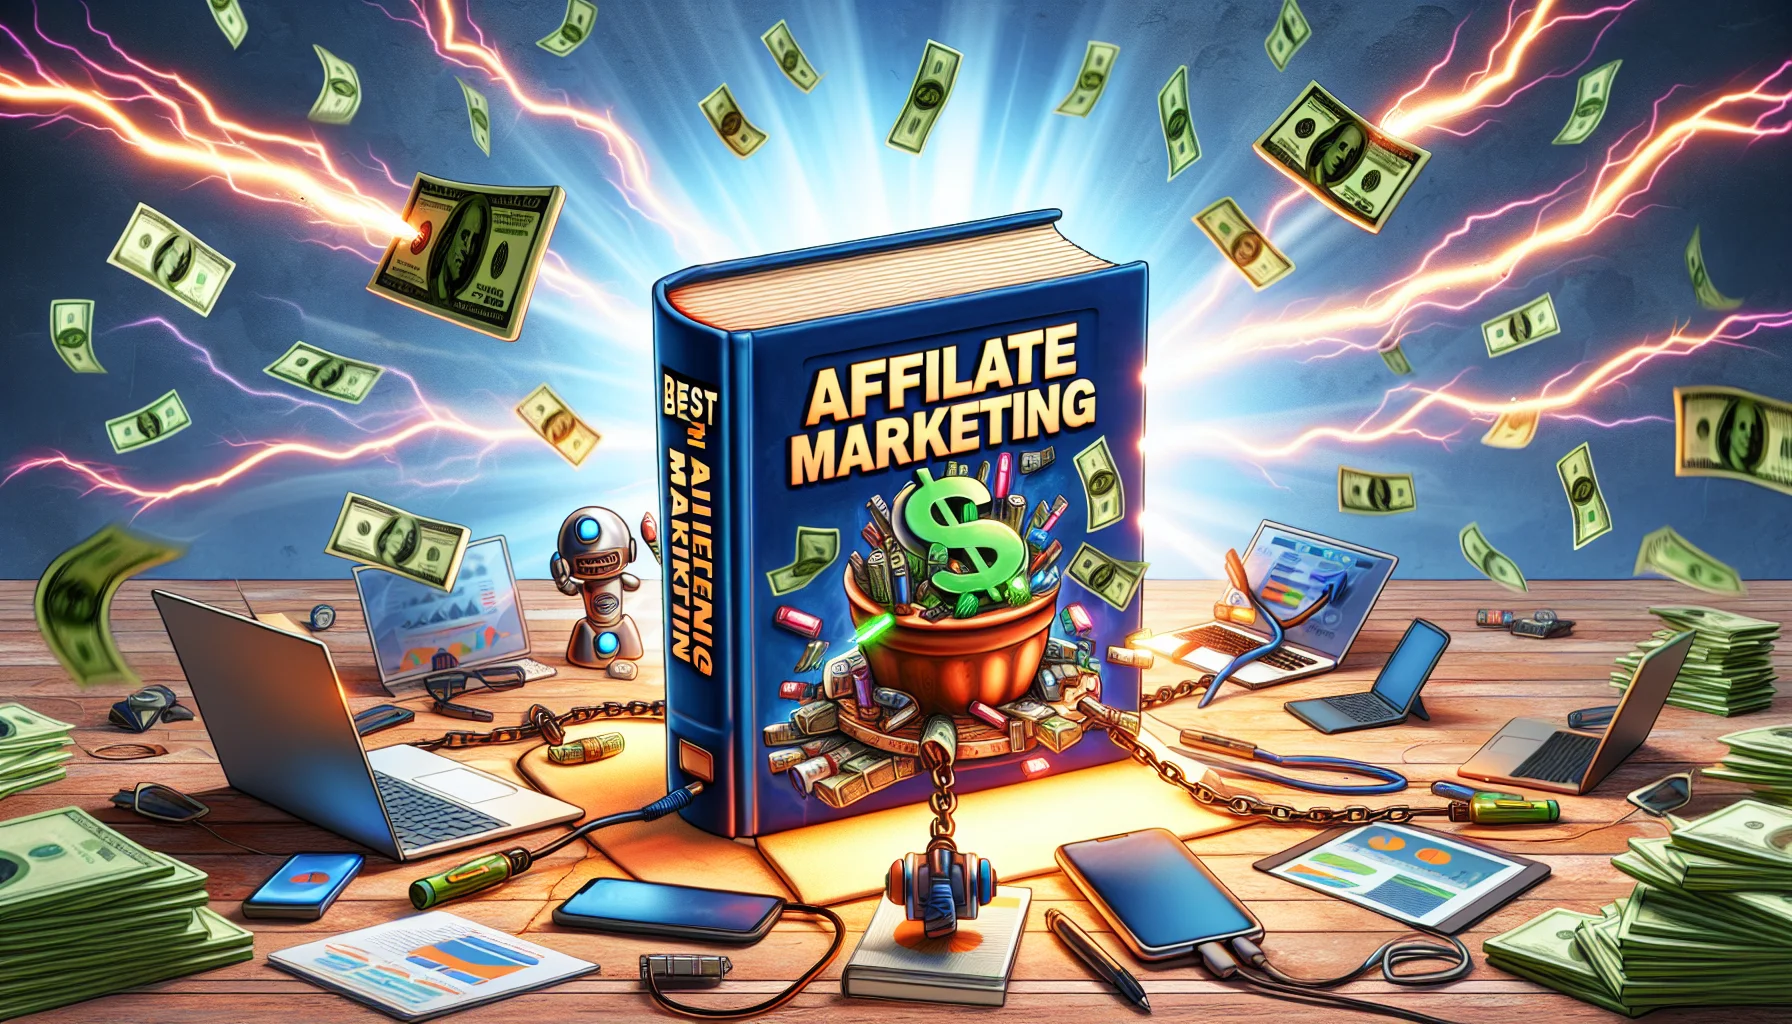 Picture a humorous, yet realistic scene set in an online money-making environment. In the middle of the scene, place the best book on affiliate marketing, as if it's the powerhouse of the operation. Illustrate the cover to be enticing with eye-catching colors and suggestive graphics related to making money online. Perhaps, draw a few cartoon dollar bills streaming out of the book, symbolizing the prosperous knowledge contained within. Surround the book with some generic tech devices - a laptop, a smartphone, perhaps even a little robot. All of them should seem to be hard at work, powered by this fantastic book.